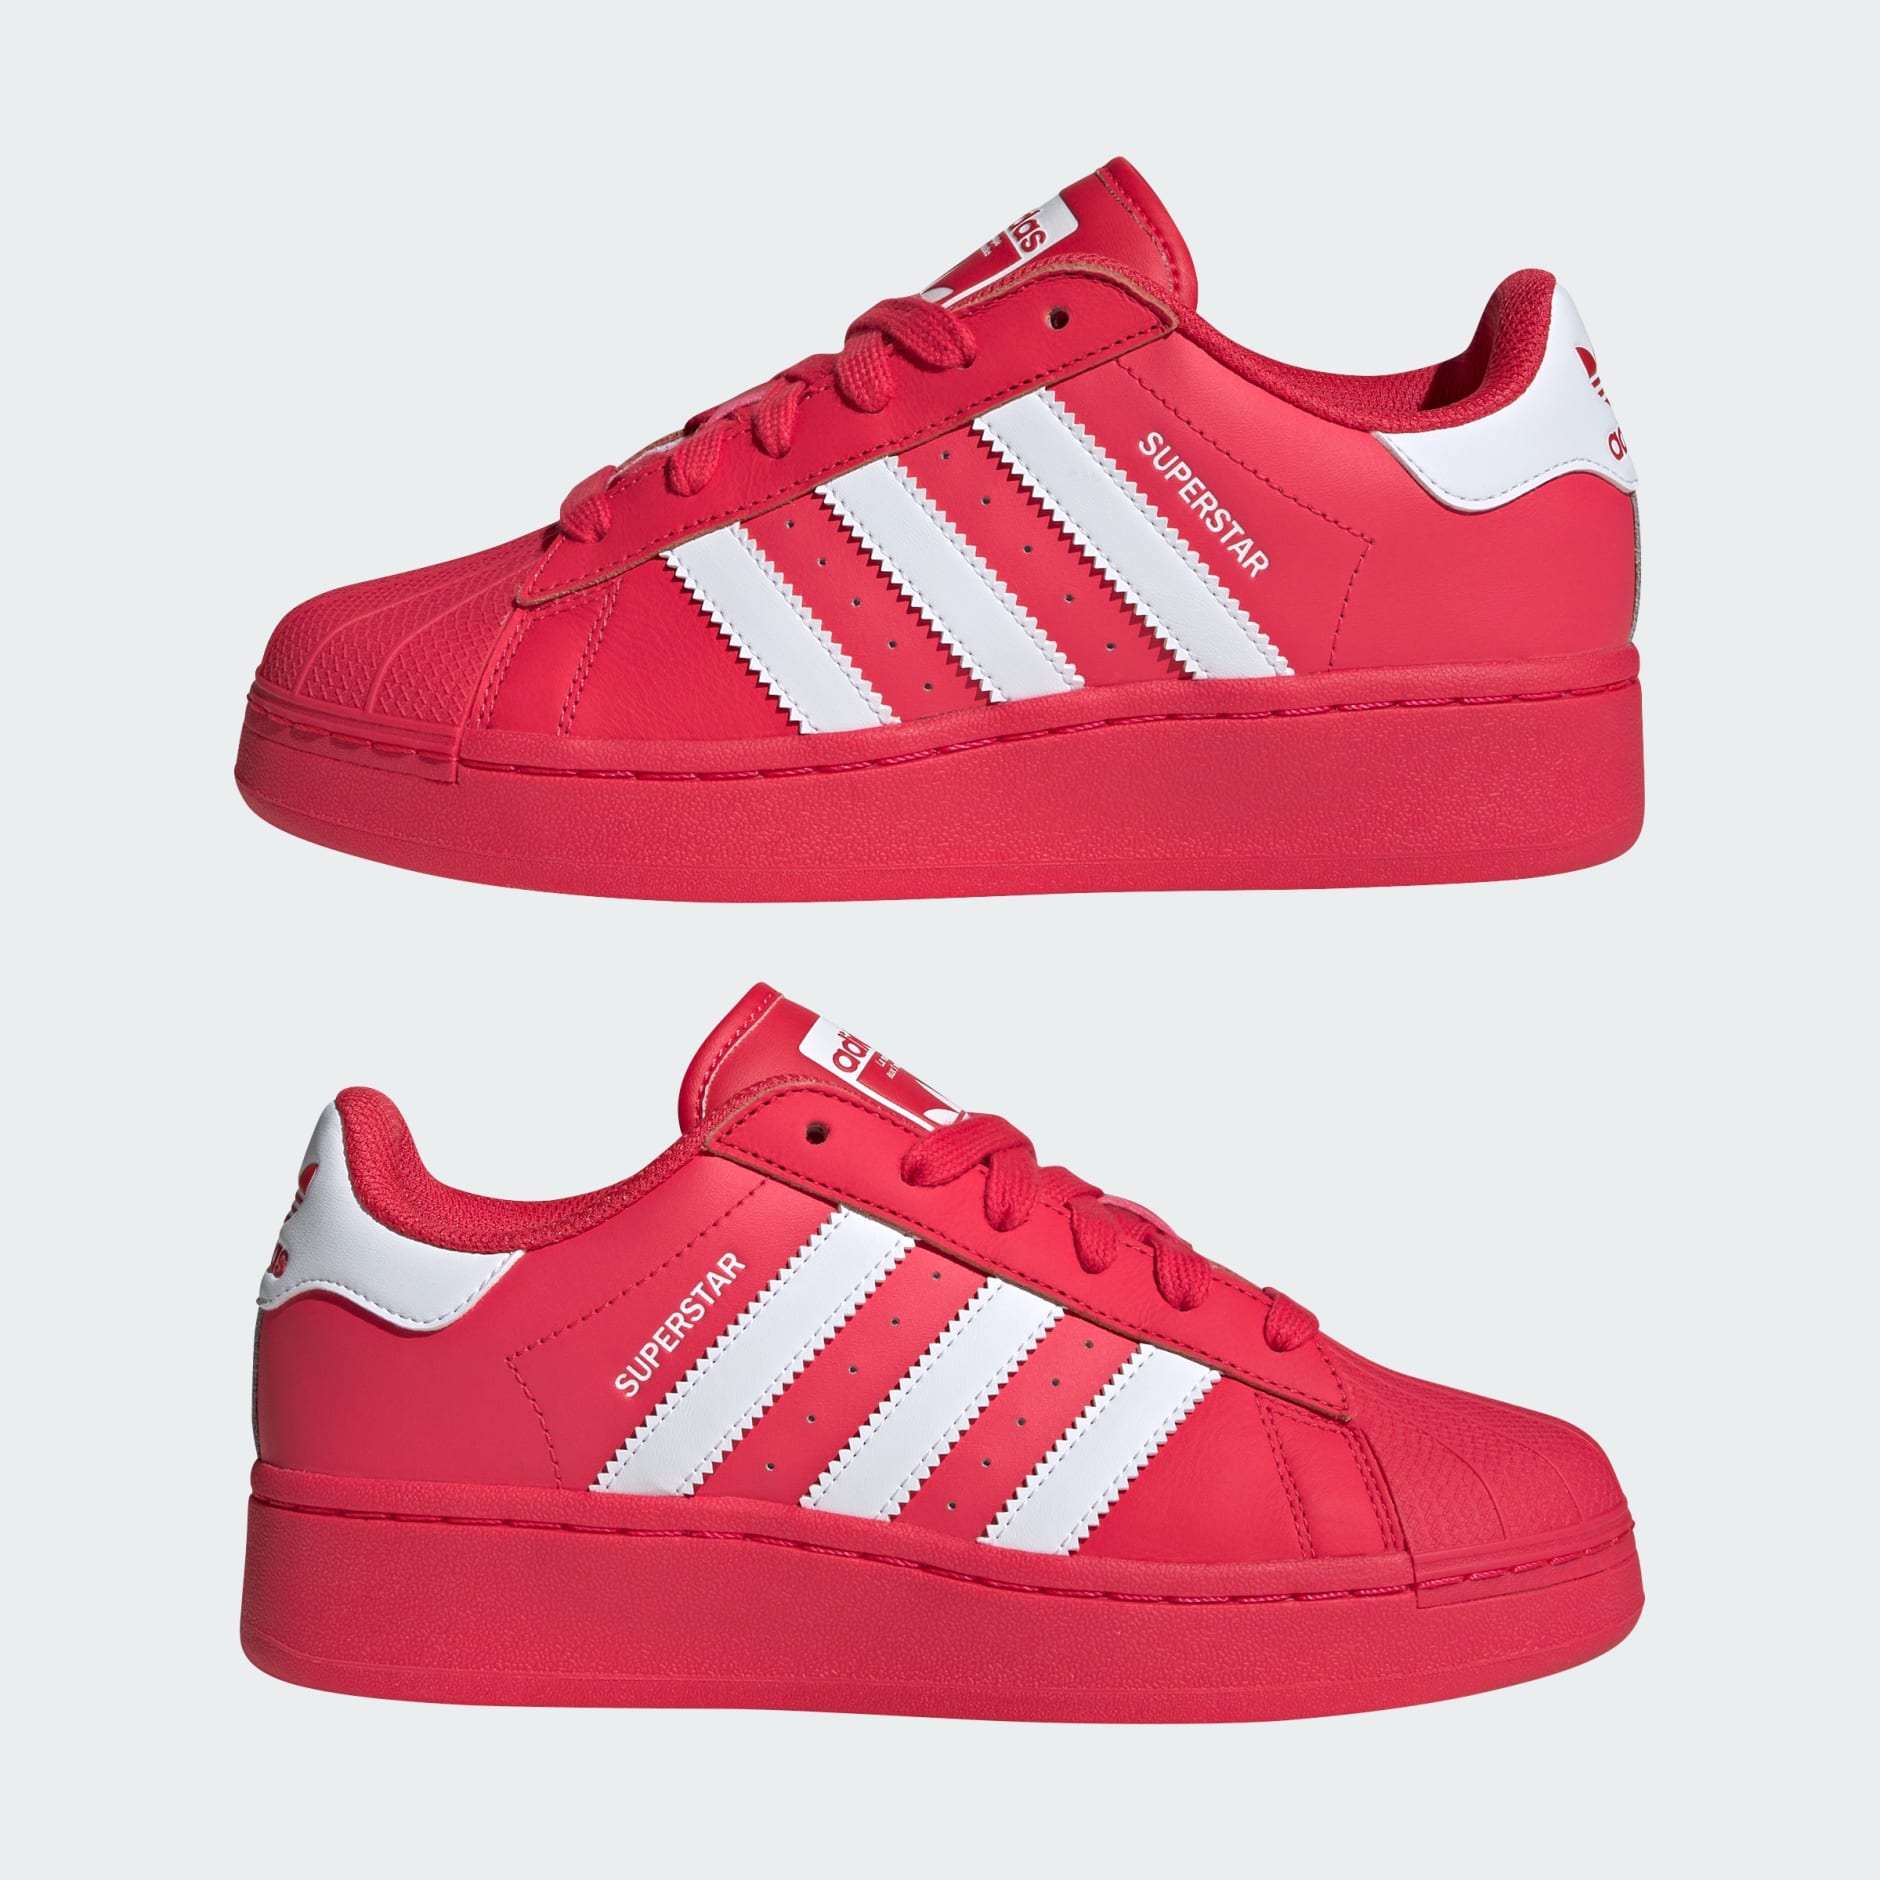 adidas Superstar XLG Shoes - Red | adidas TZ